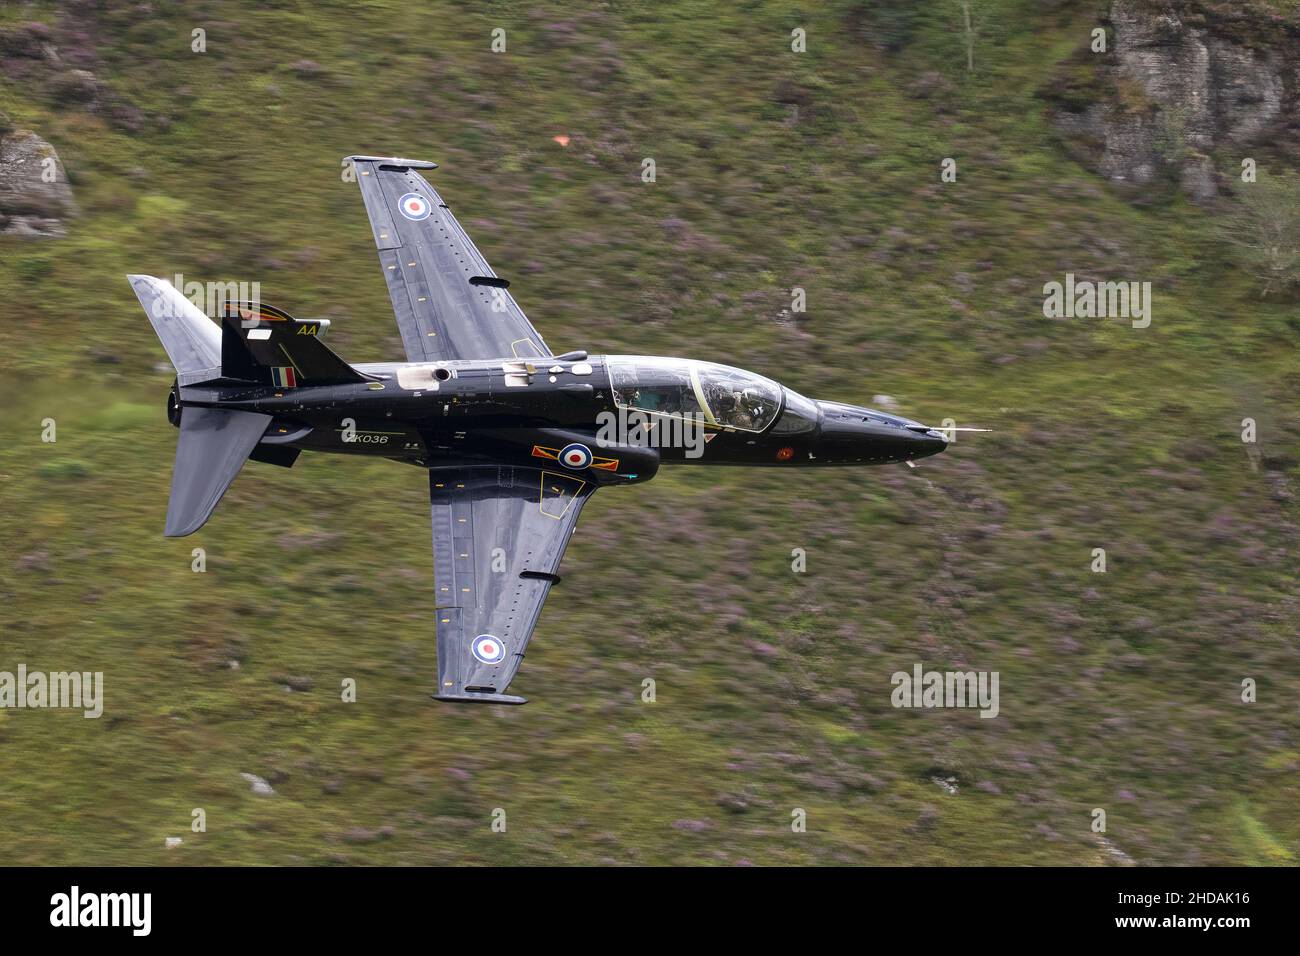 British Hawk jet-powered advanced trainer aircraft flying in the air Stock Photo